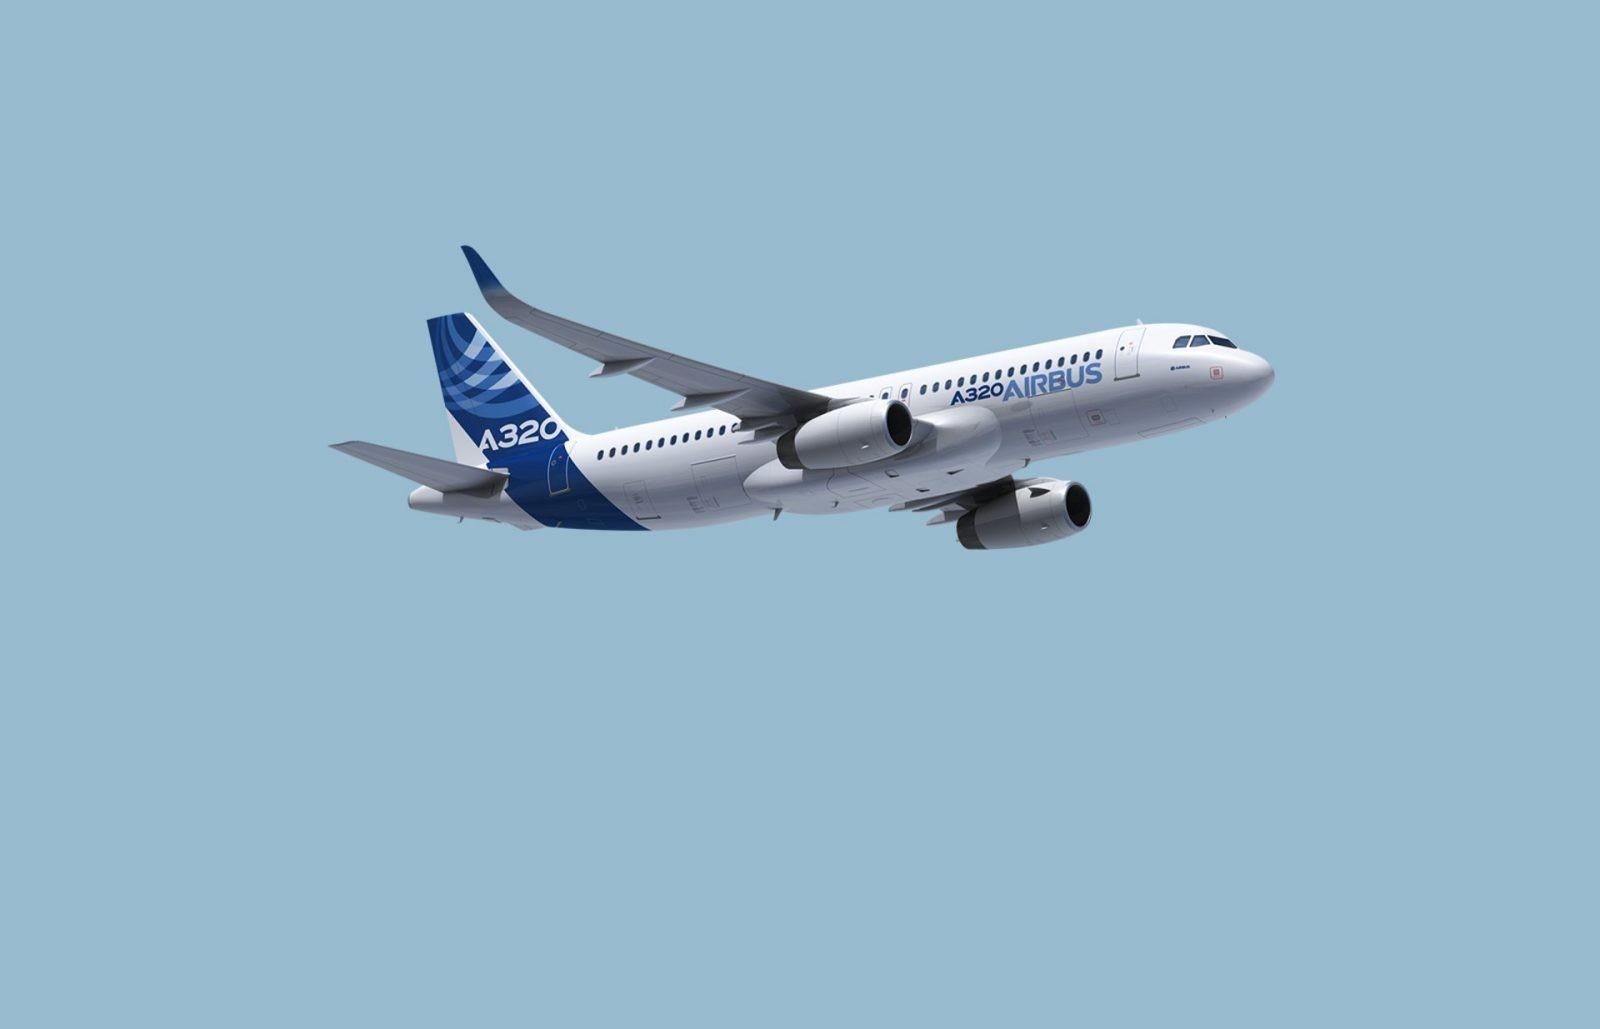 IAG Orders Additional 37 A320neo Family Aircraft